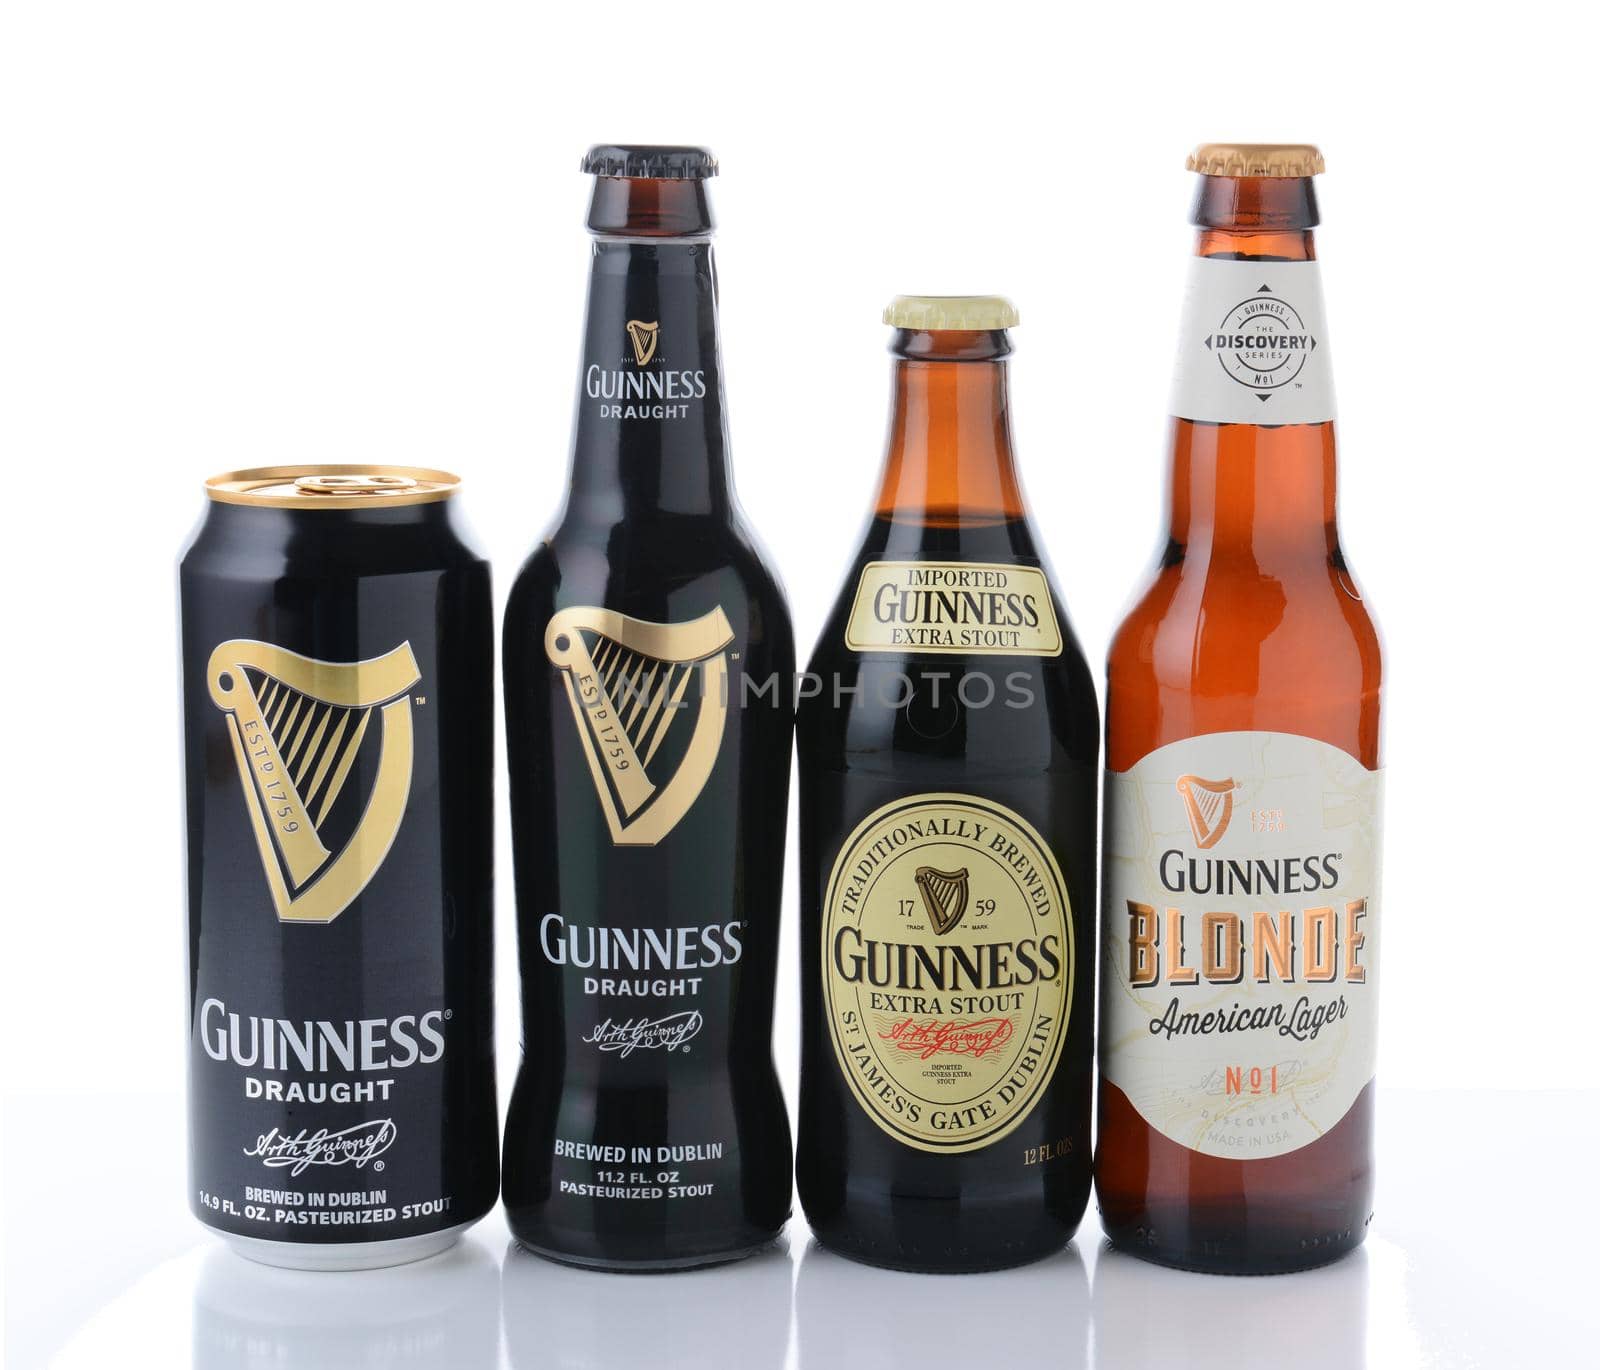 IRVINE, CA - JANUARY 12, 2015: Four bottles of beer from the Guinness Brewing Company.  Guinness has been producing beer in Ireland since 1759.